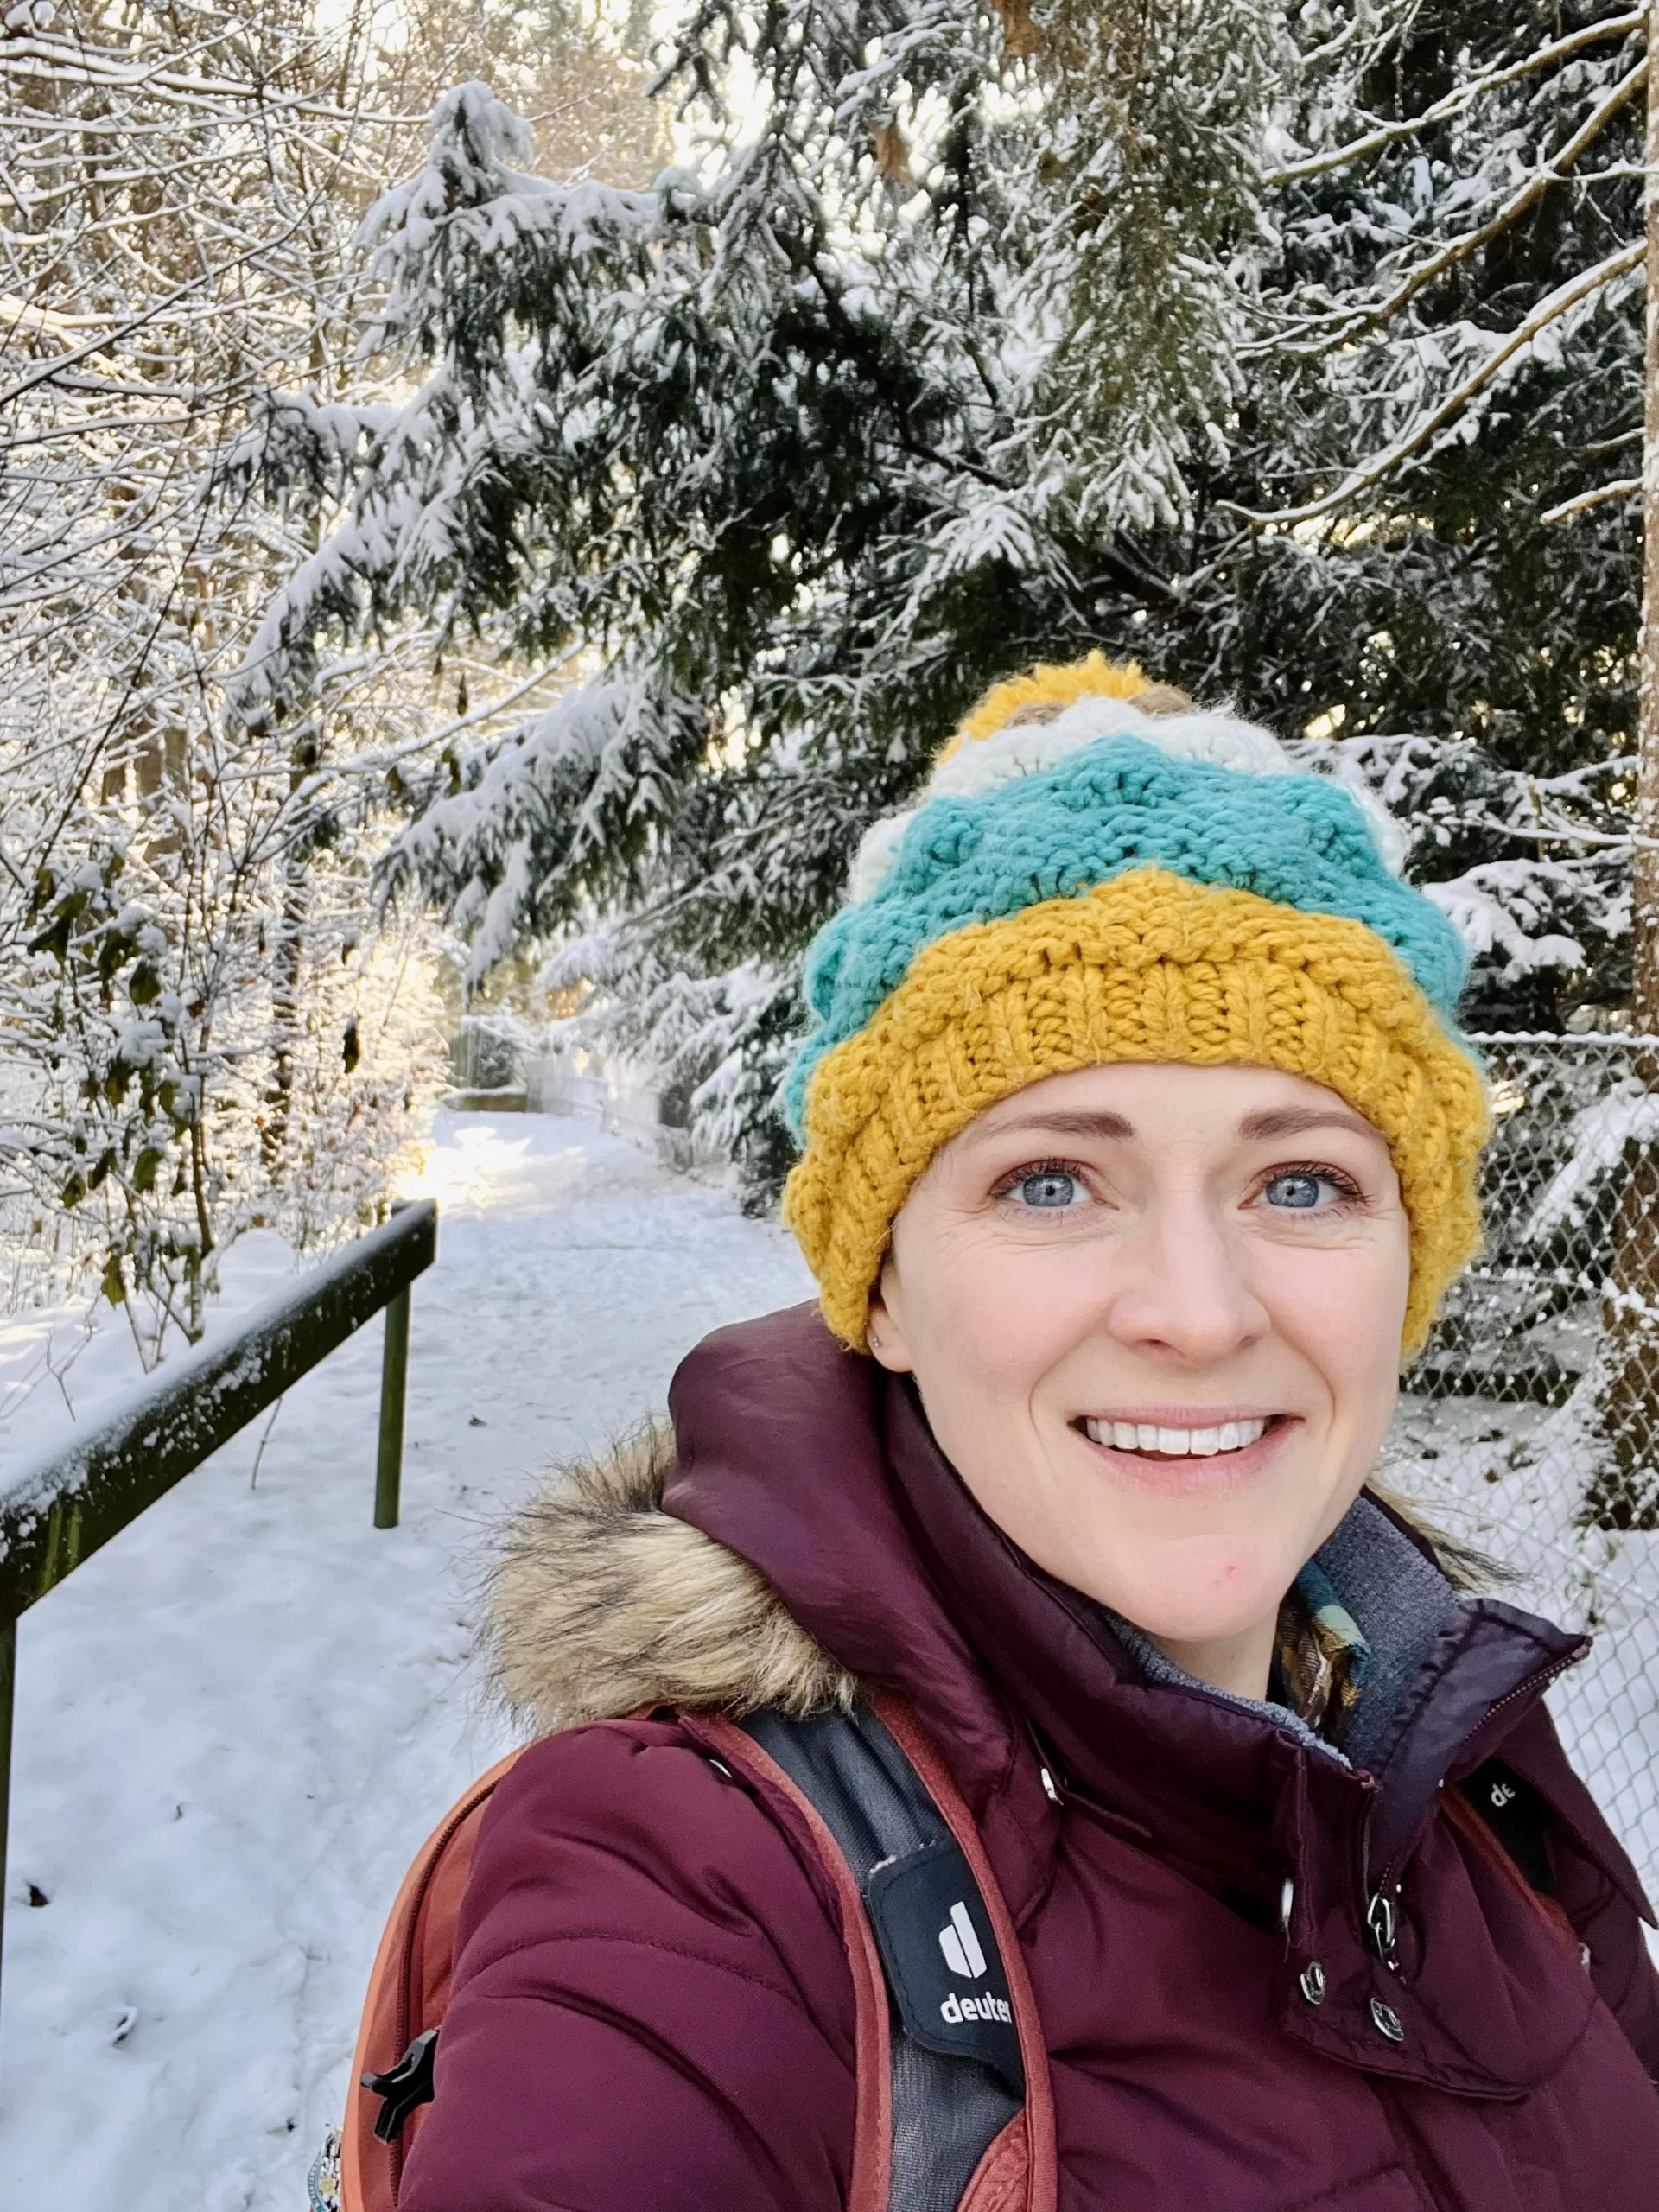 How I Practice Hygge to Enjoy German Winters - I get out for walks even when it's cold!